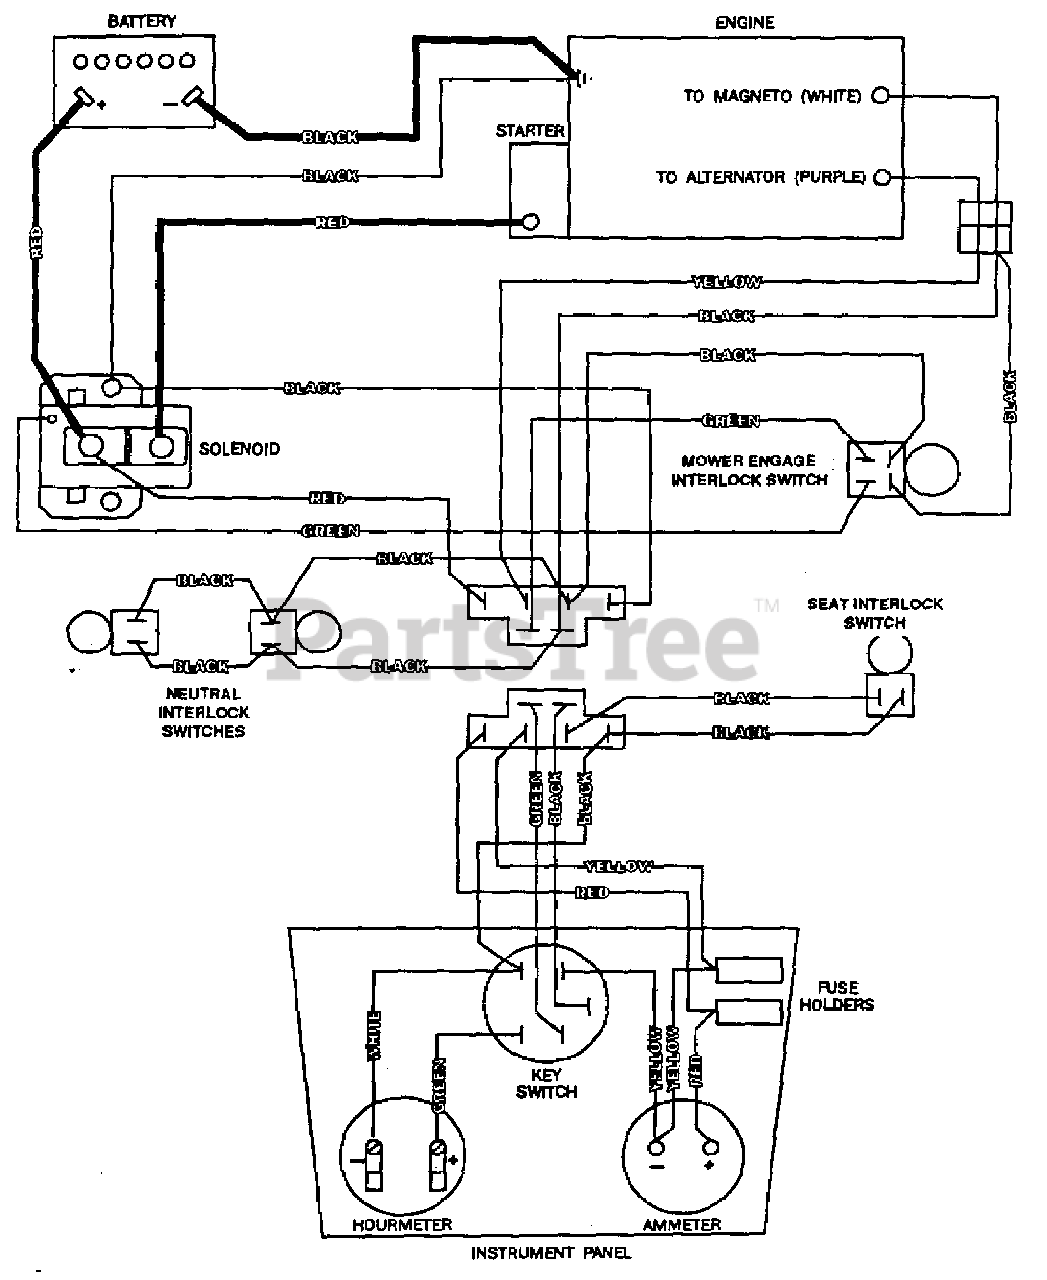 Scag Wiring Diagram from www.partstree.com